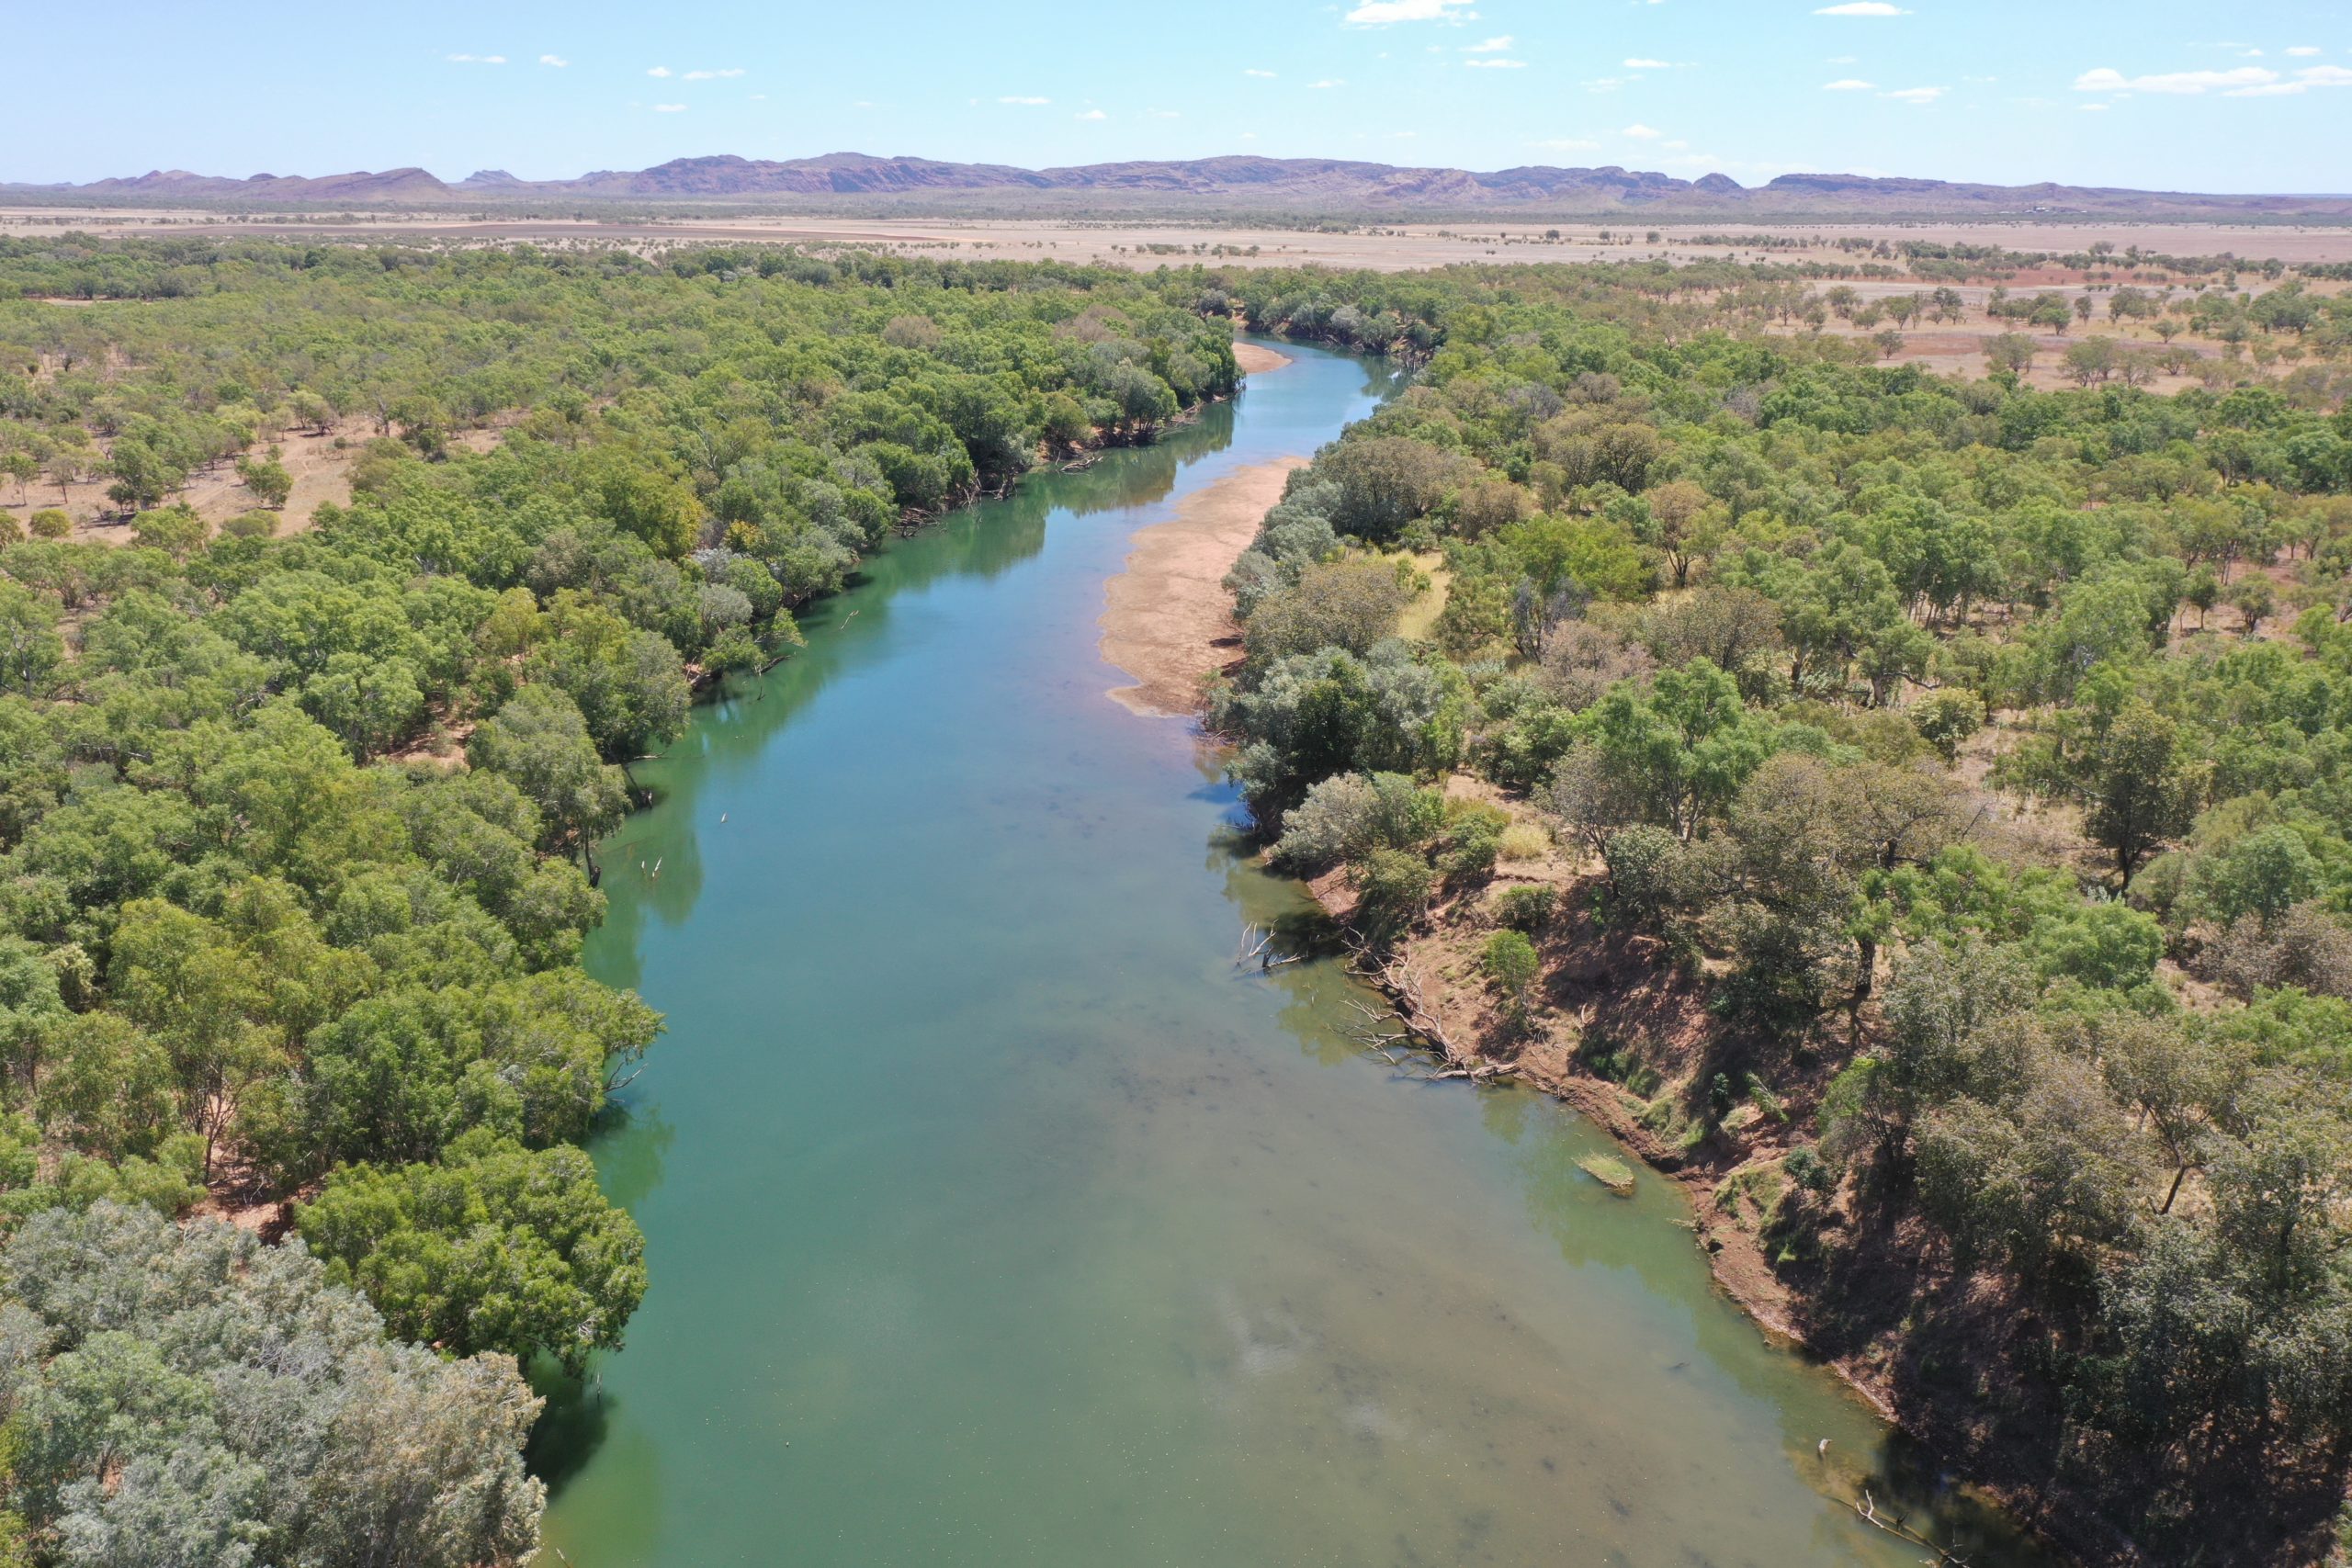 Fitzroy river meanders through green vegetation with some shallow sandy banks visible and distinctive Kimberley rock formations in the background.